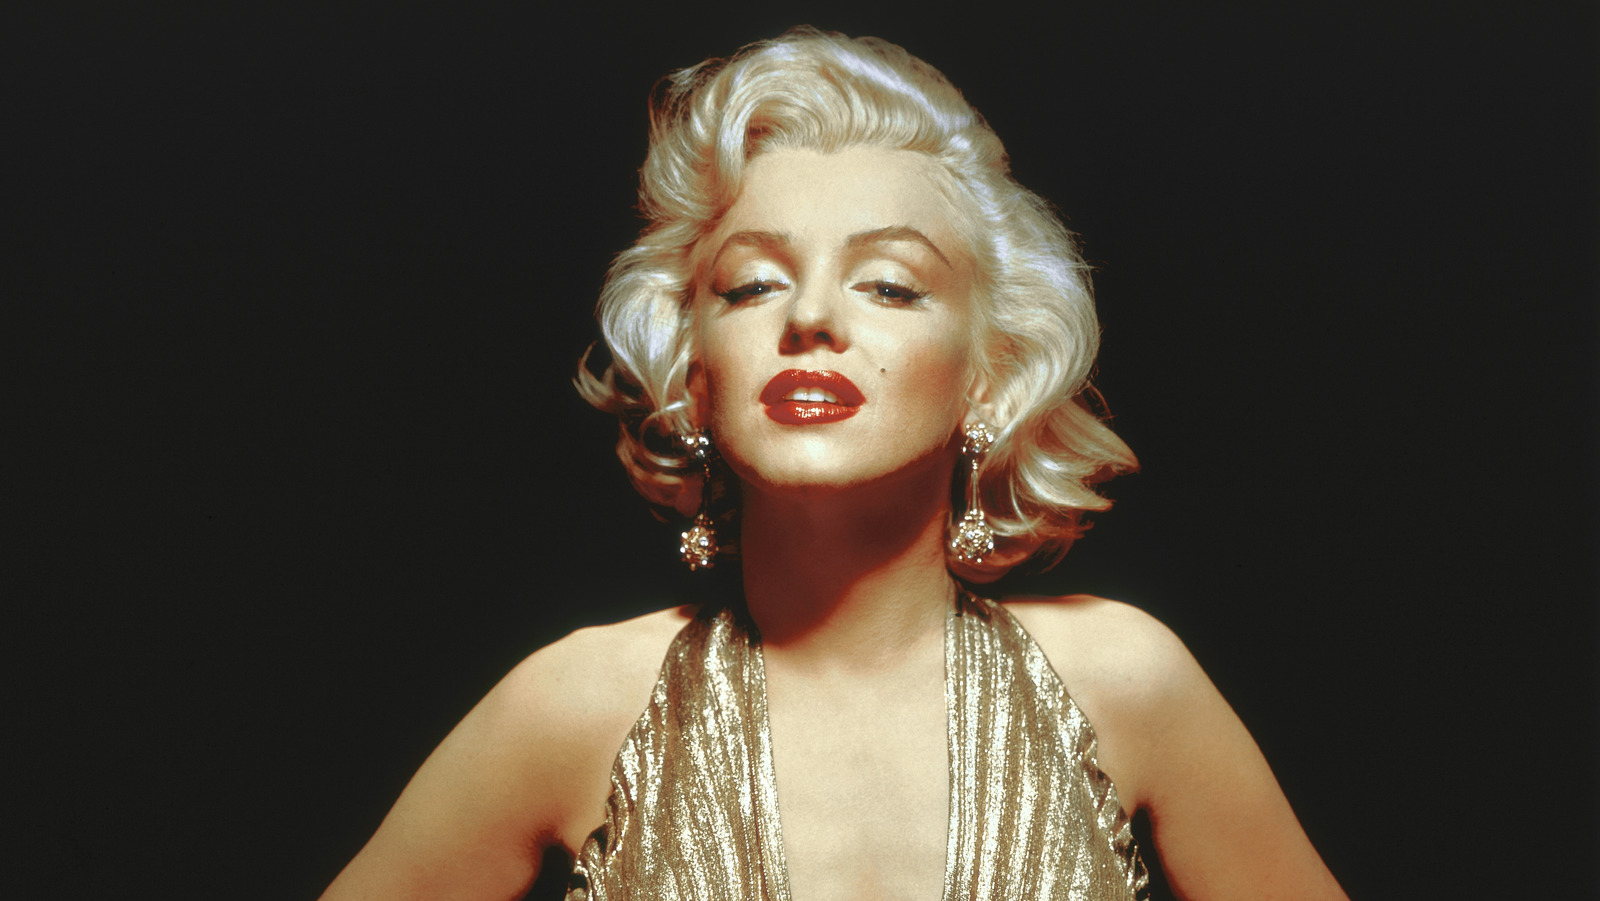 10. "The History of Icy Platinum Blonde Hair: From Marilyn Monroe to Today's Trends" - wide 2